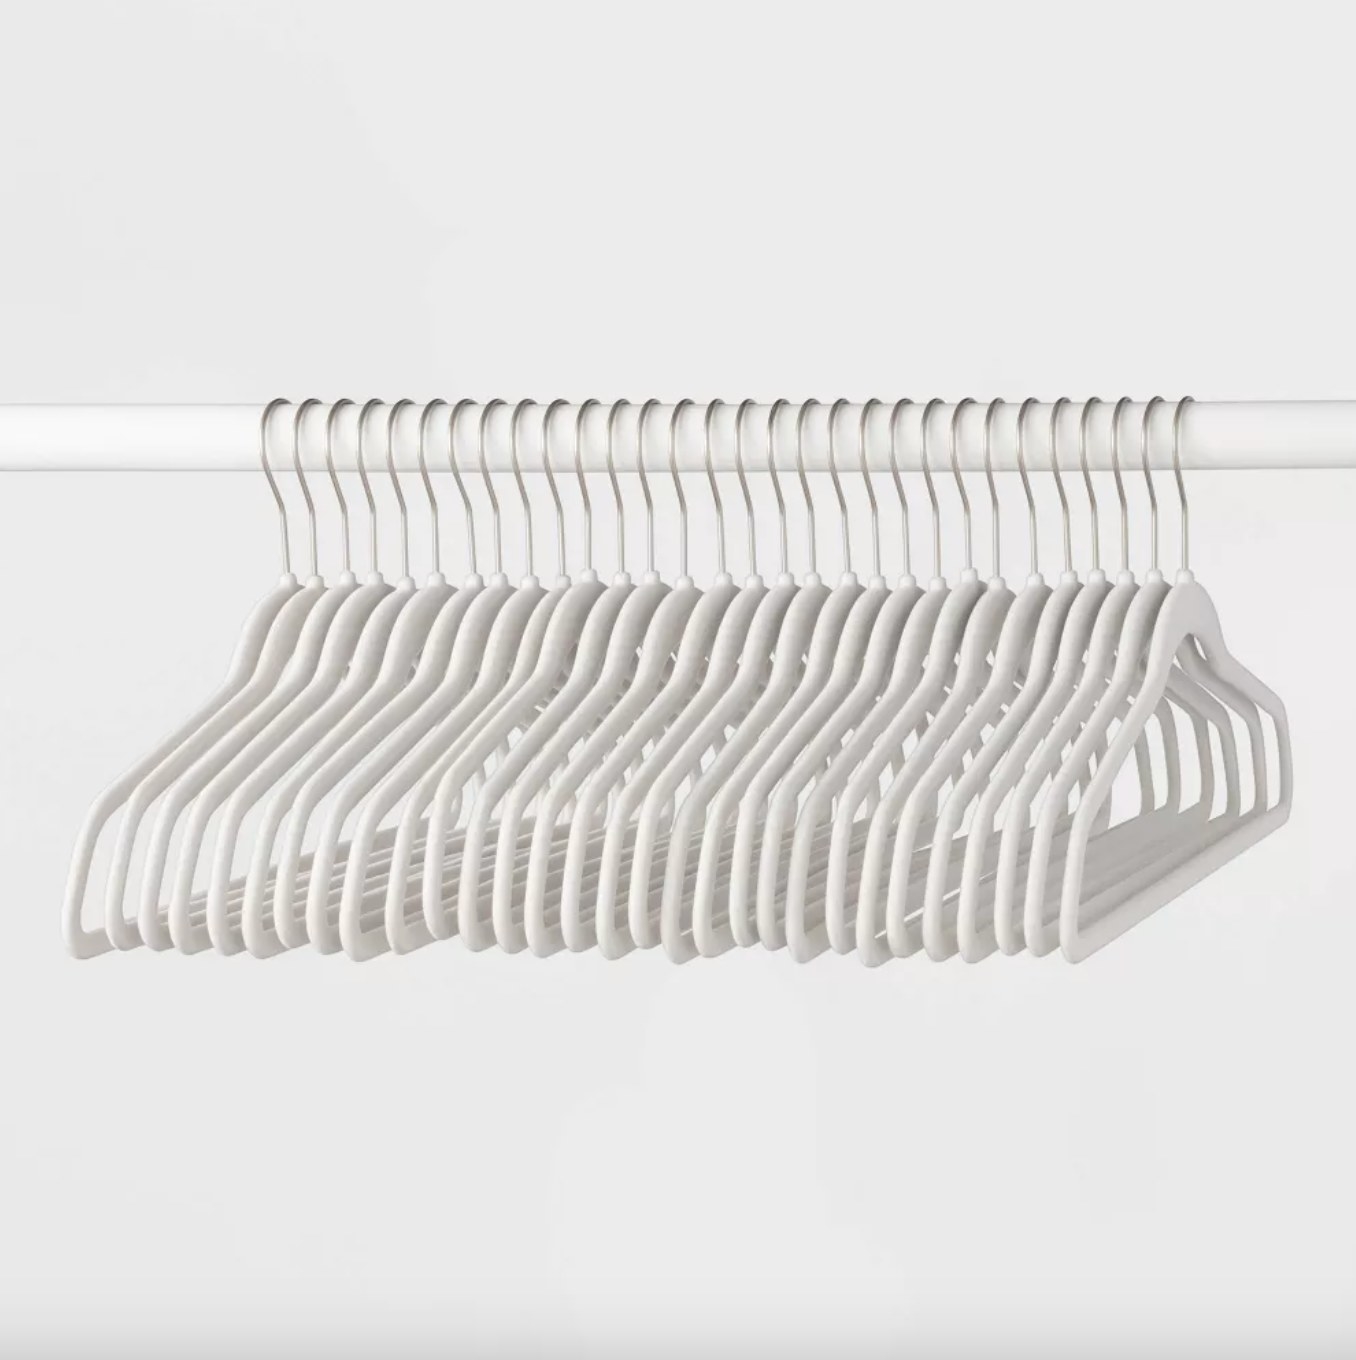 the set of white hangers on a white clothes rod